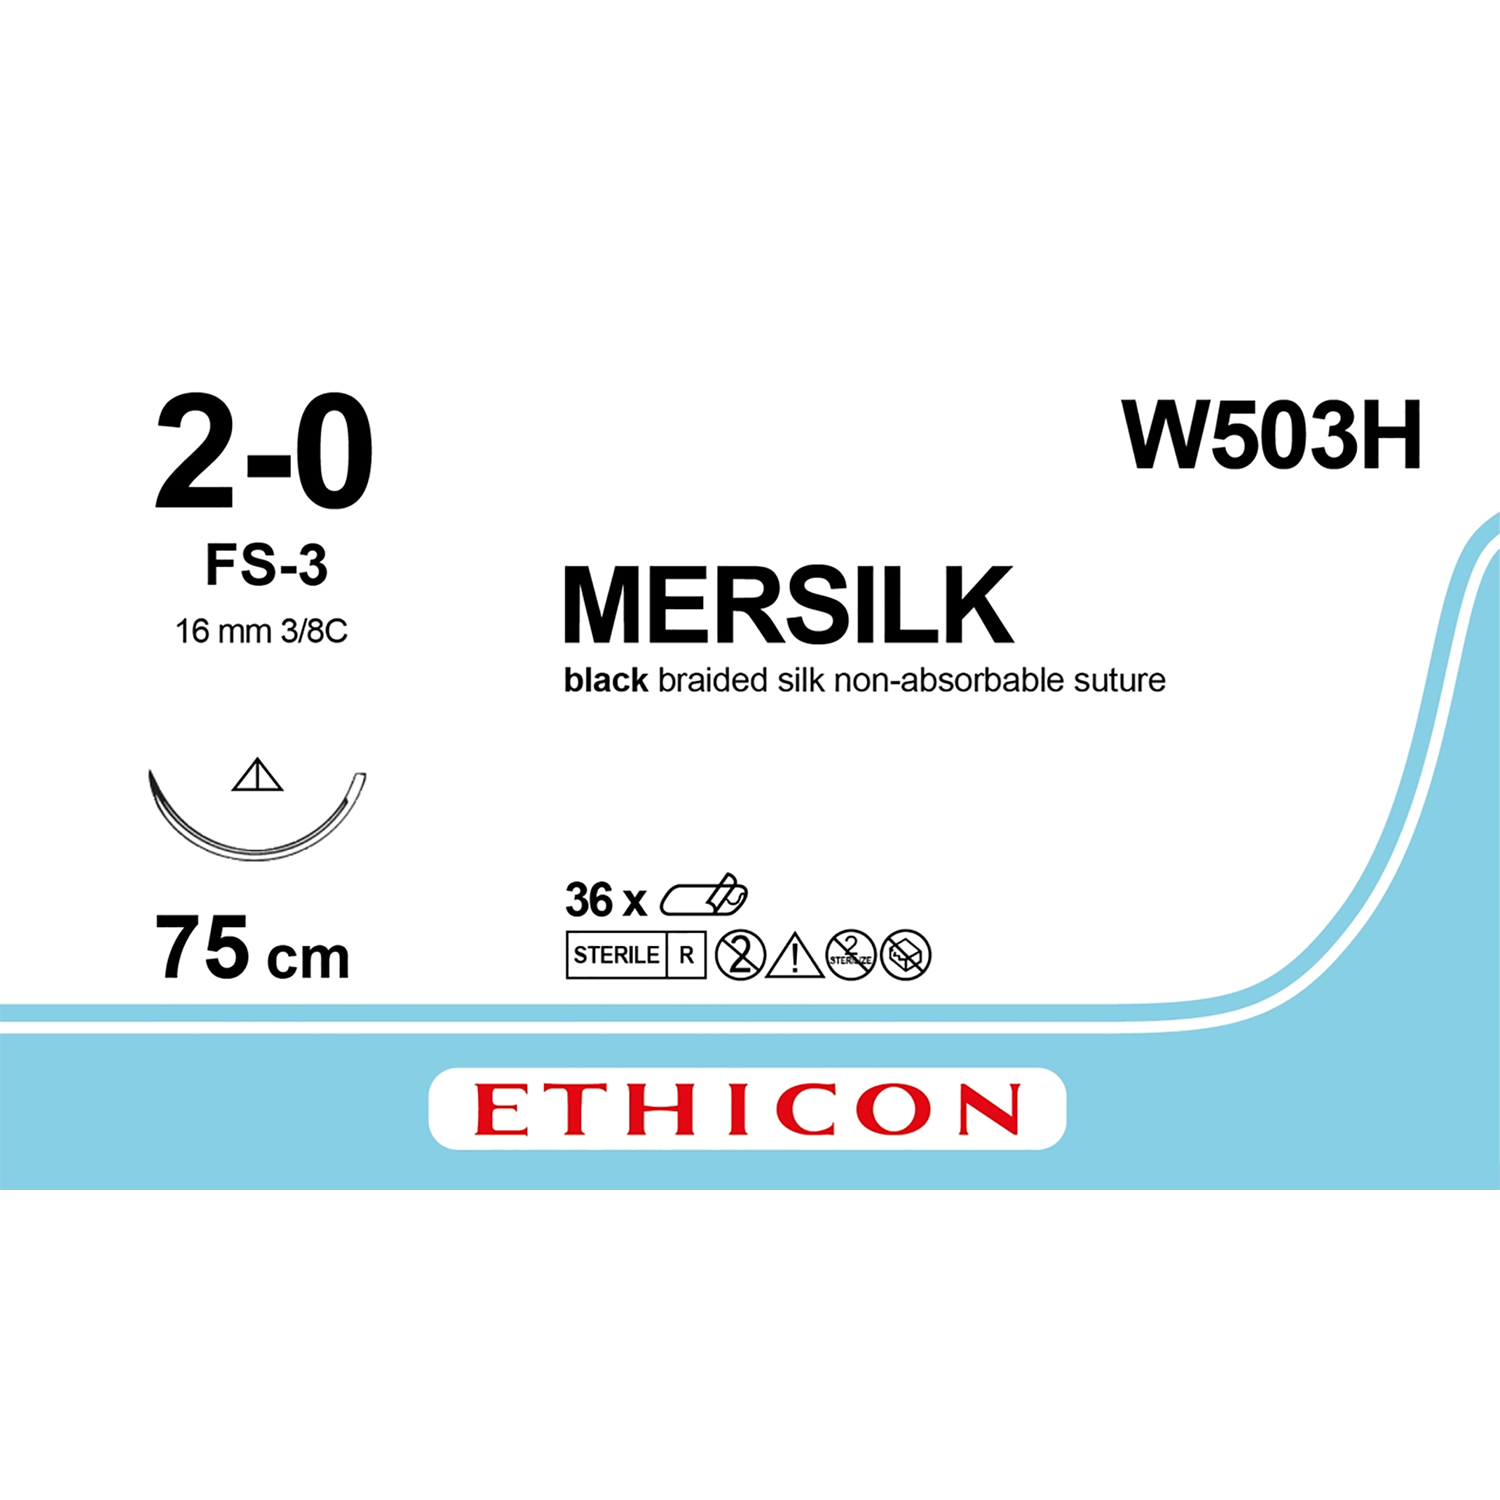 Ethicon sMersilk Suture | Non Absorbable | Black | Size: 2-0 | Length: 75cm | Needle: FS-3 | Pack of 36